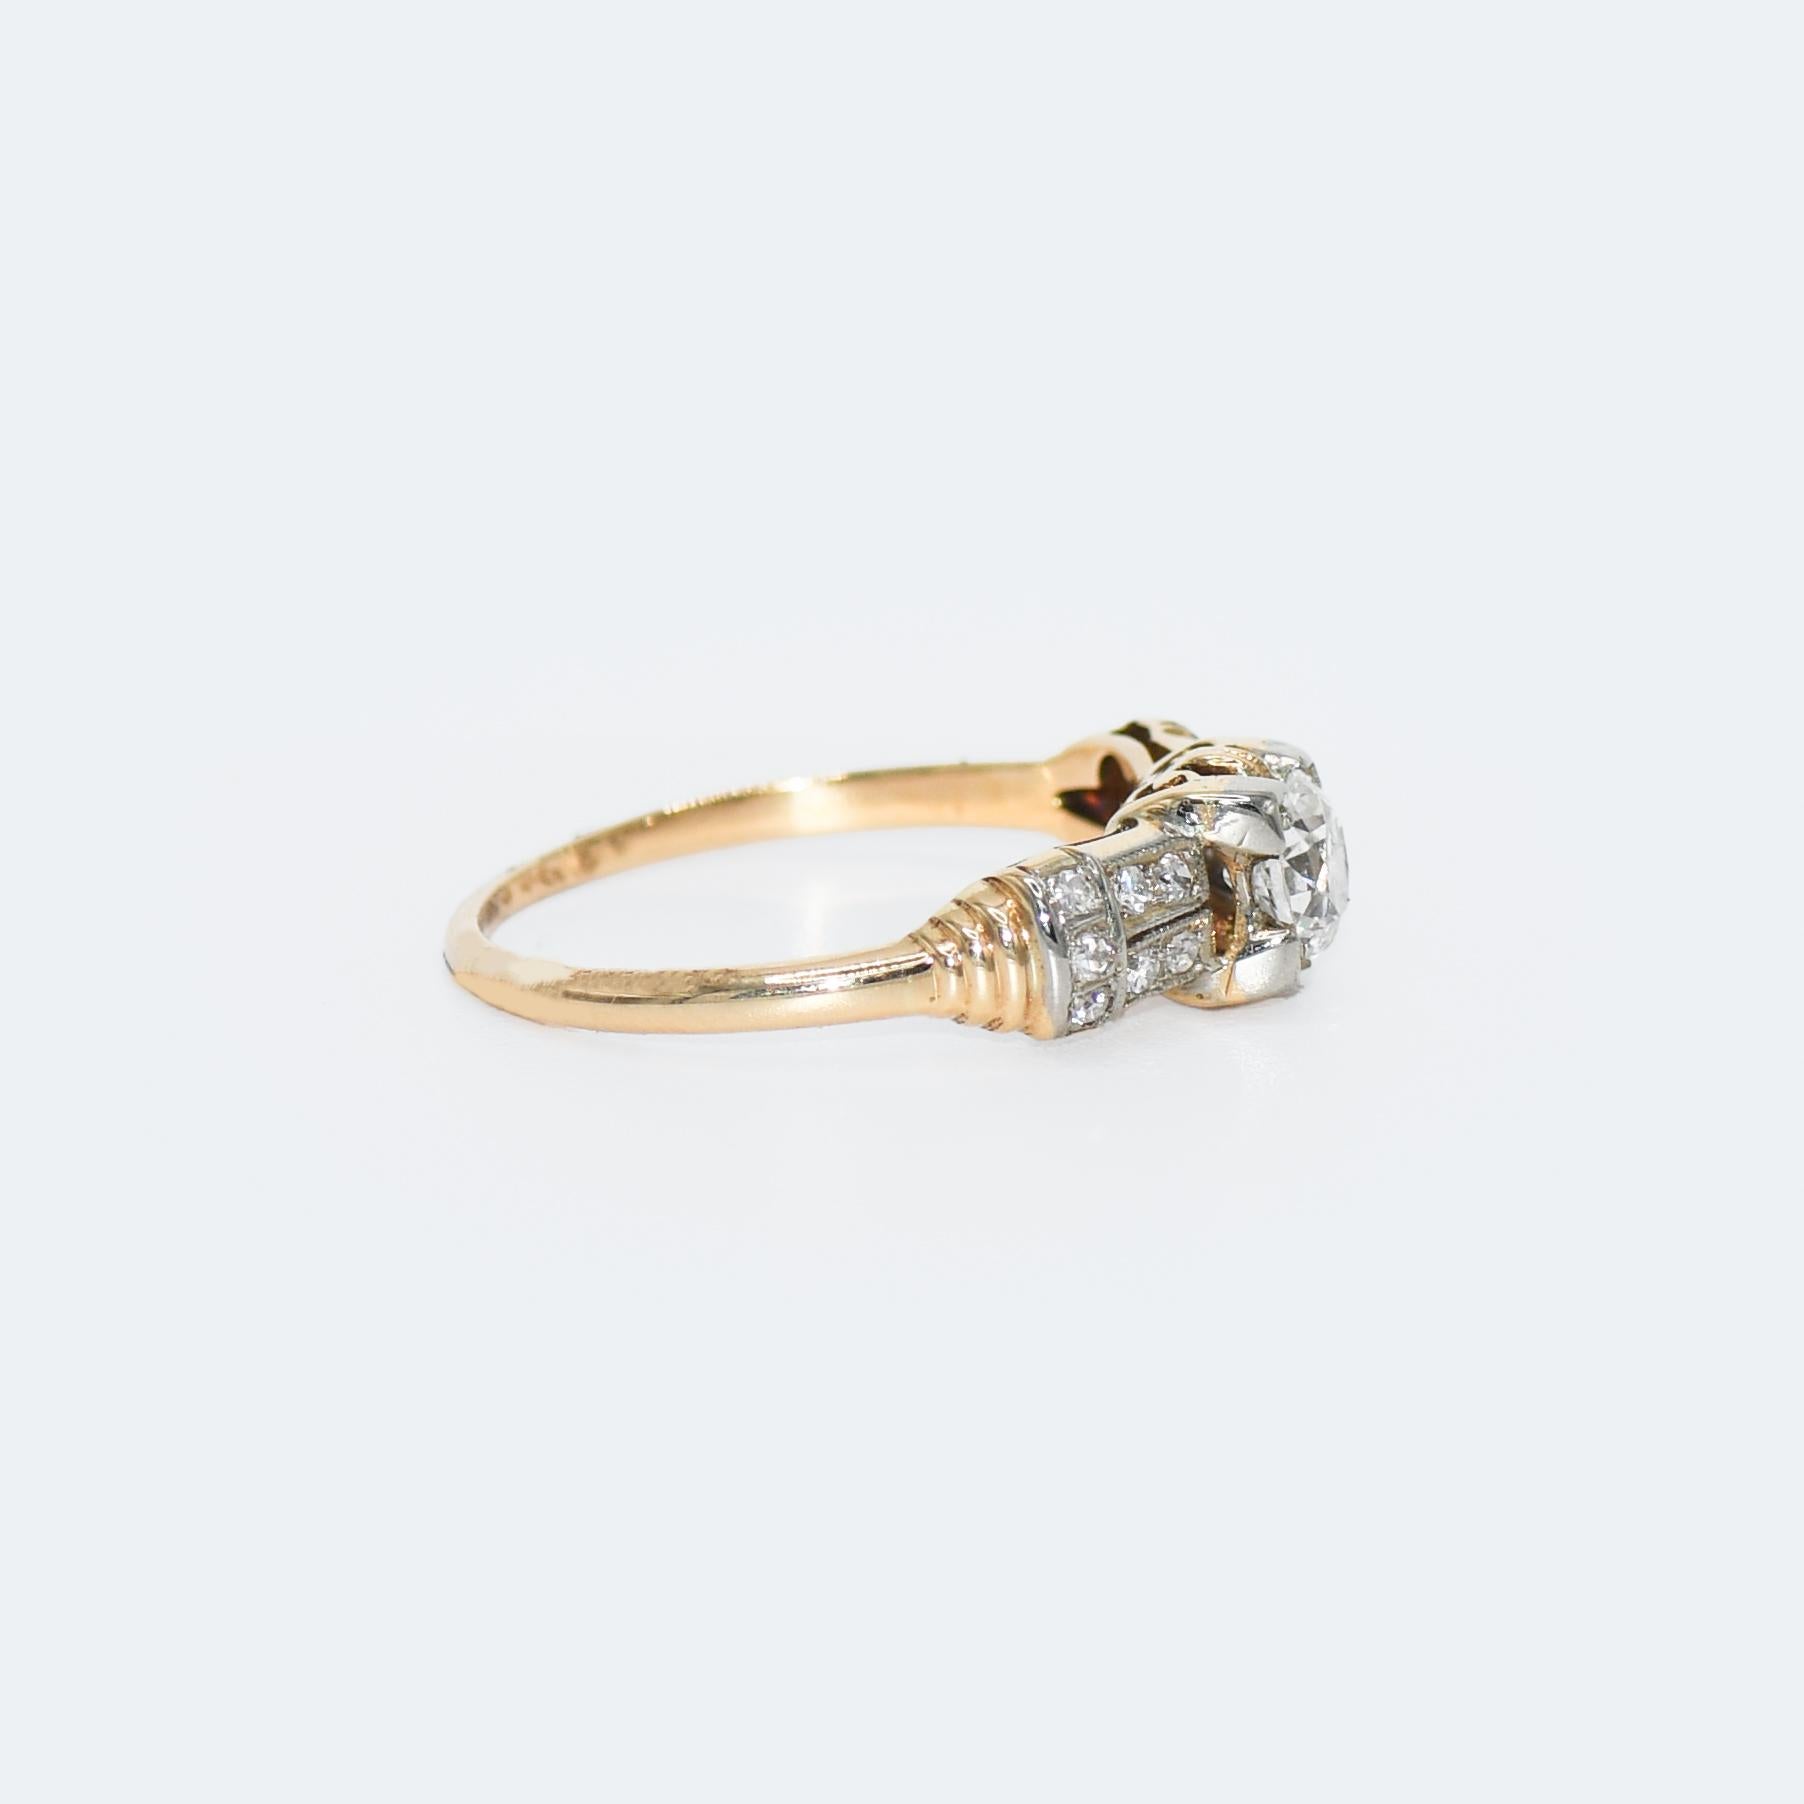 Old Mine Cut 18k Yellow Gold 0.54ct Diamond Art Deco Engagement Ring, Size 6.5 For Sale